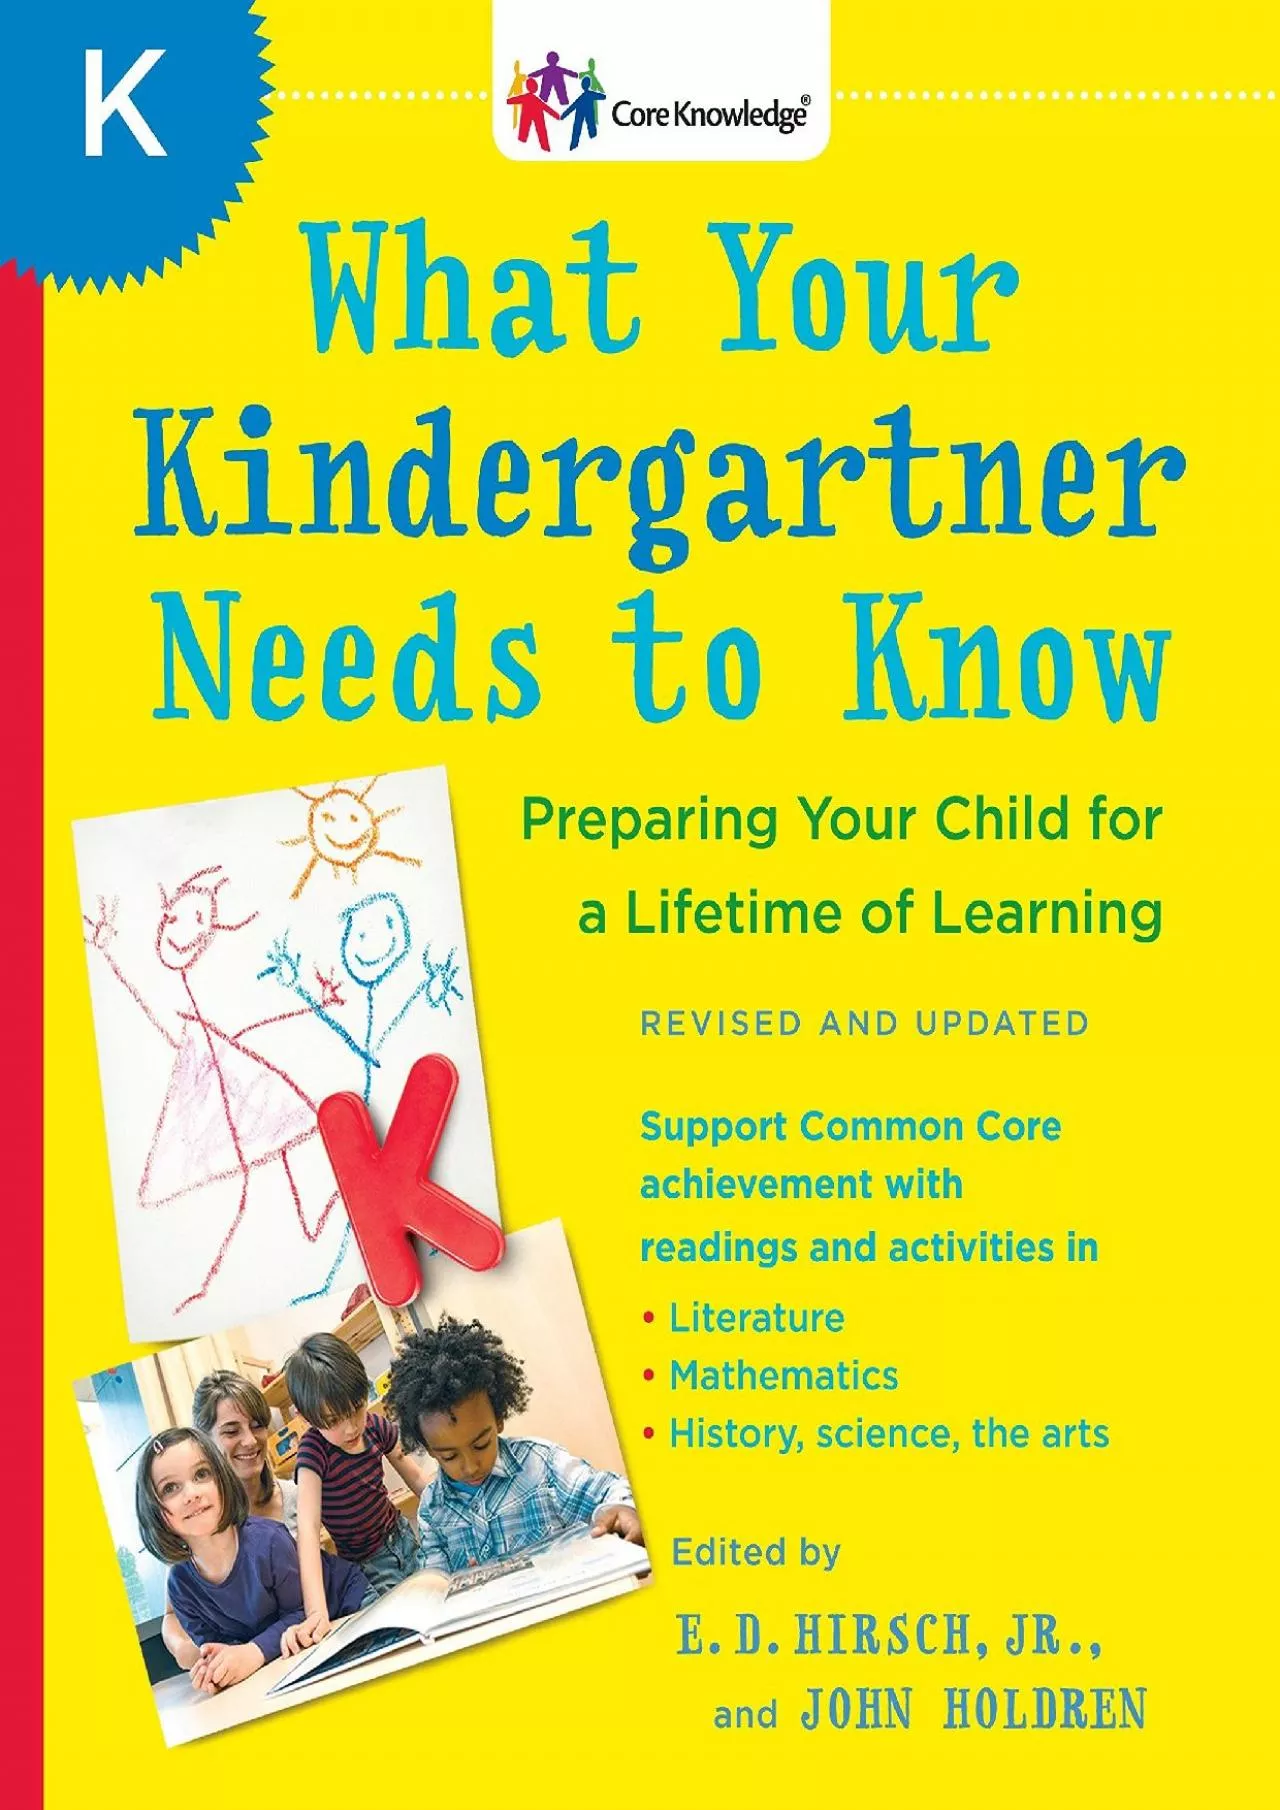 [DOWNLOAD] What Your Kindergartner Needs to Know (Revised and updated): Preparing Your